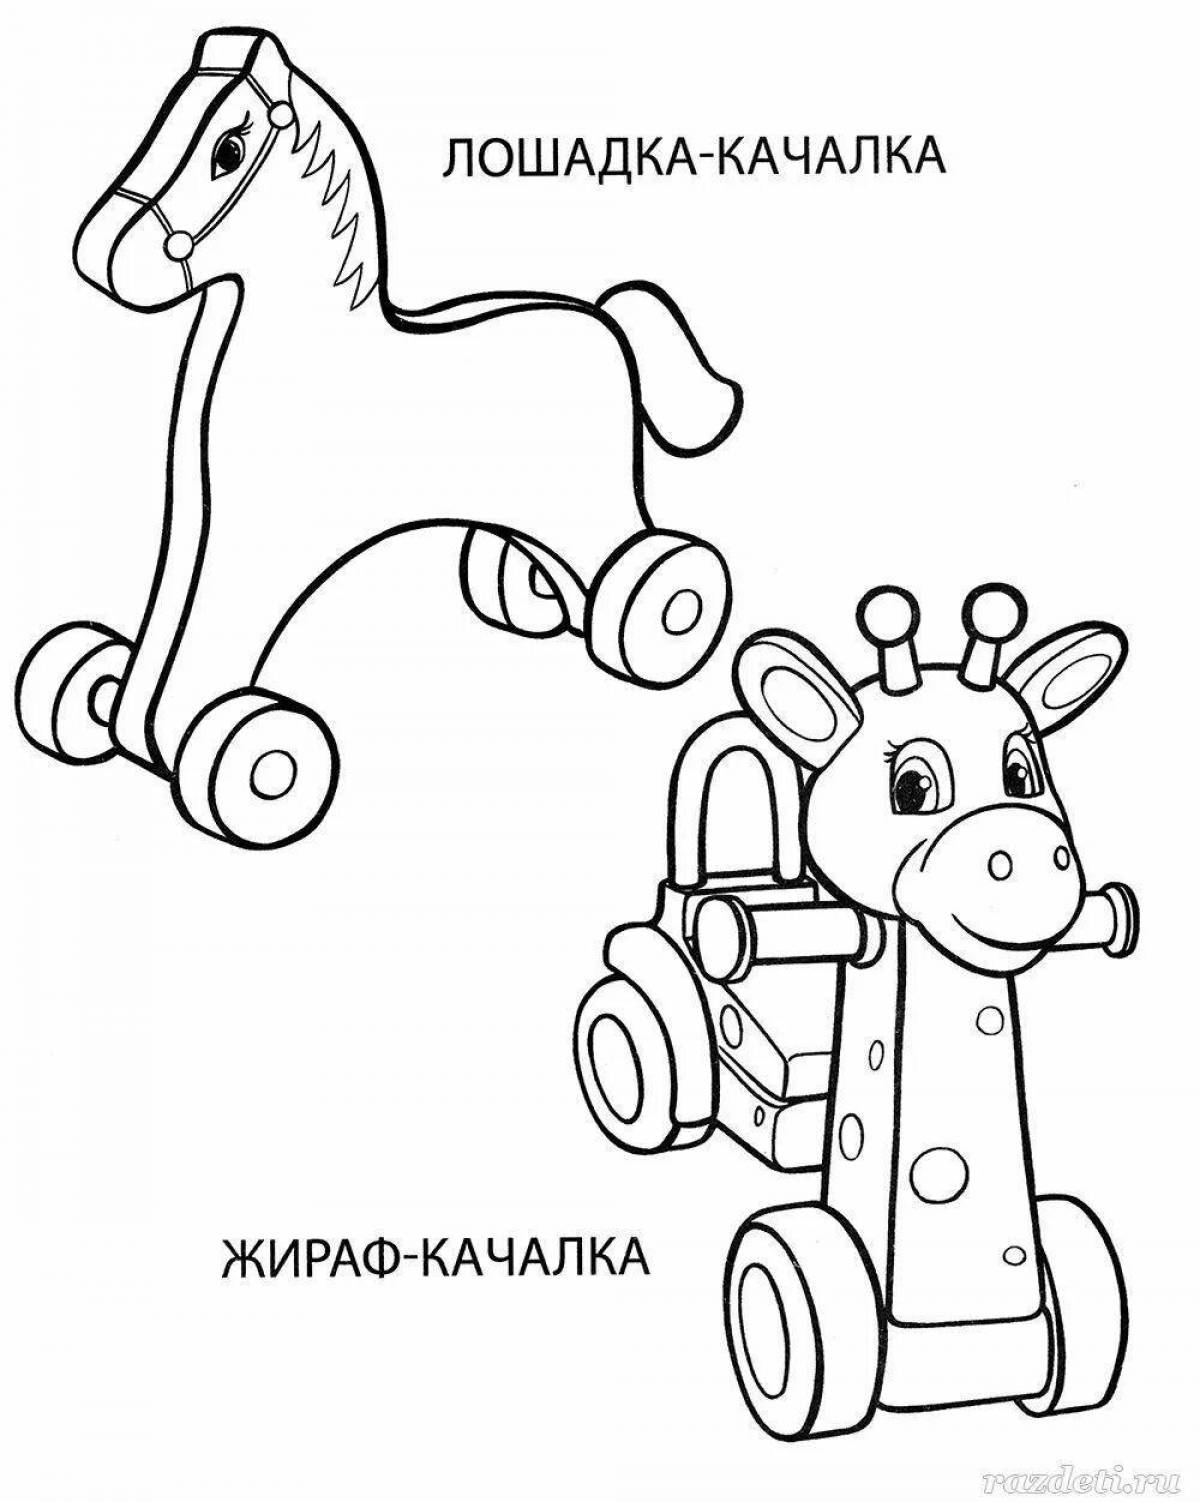 Merry Russian folk toy coloring book